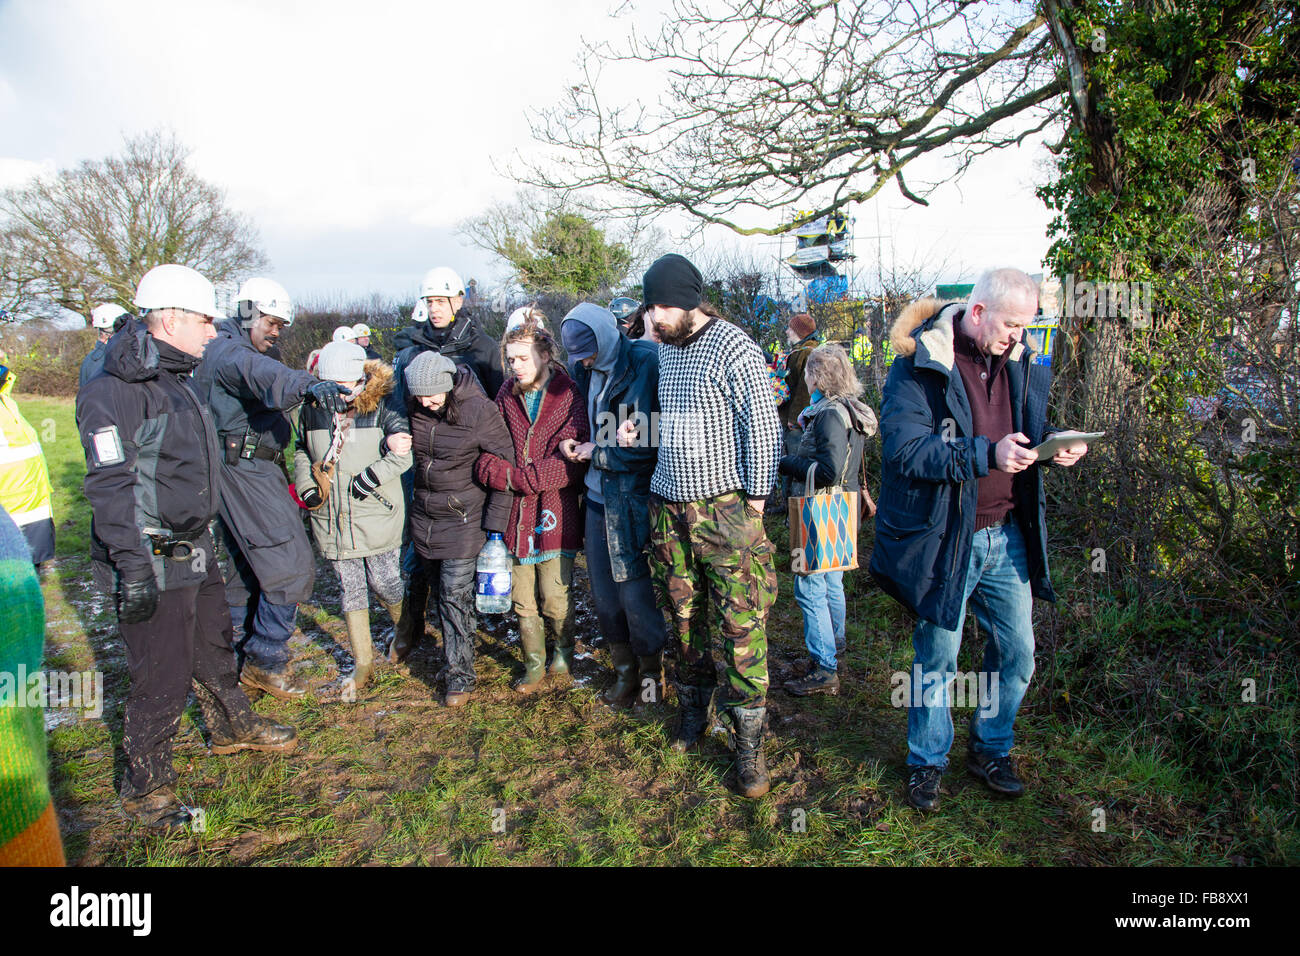 Upton, Cheshire. 12th Jan, 2016. Bailiffs removing locals, protestors and press from an adjoining field at Upton anti fracking camp as bailiffs and policemove in to evict the camp  Credit:  Jason Smalley / Alamy Live News Stock Photo